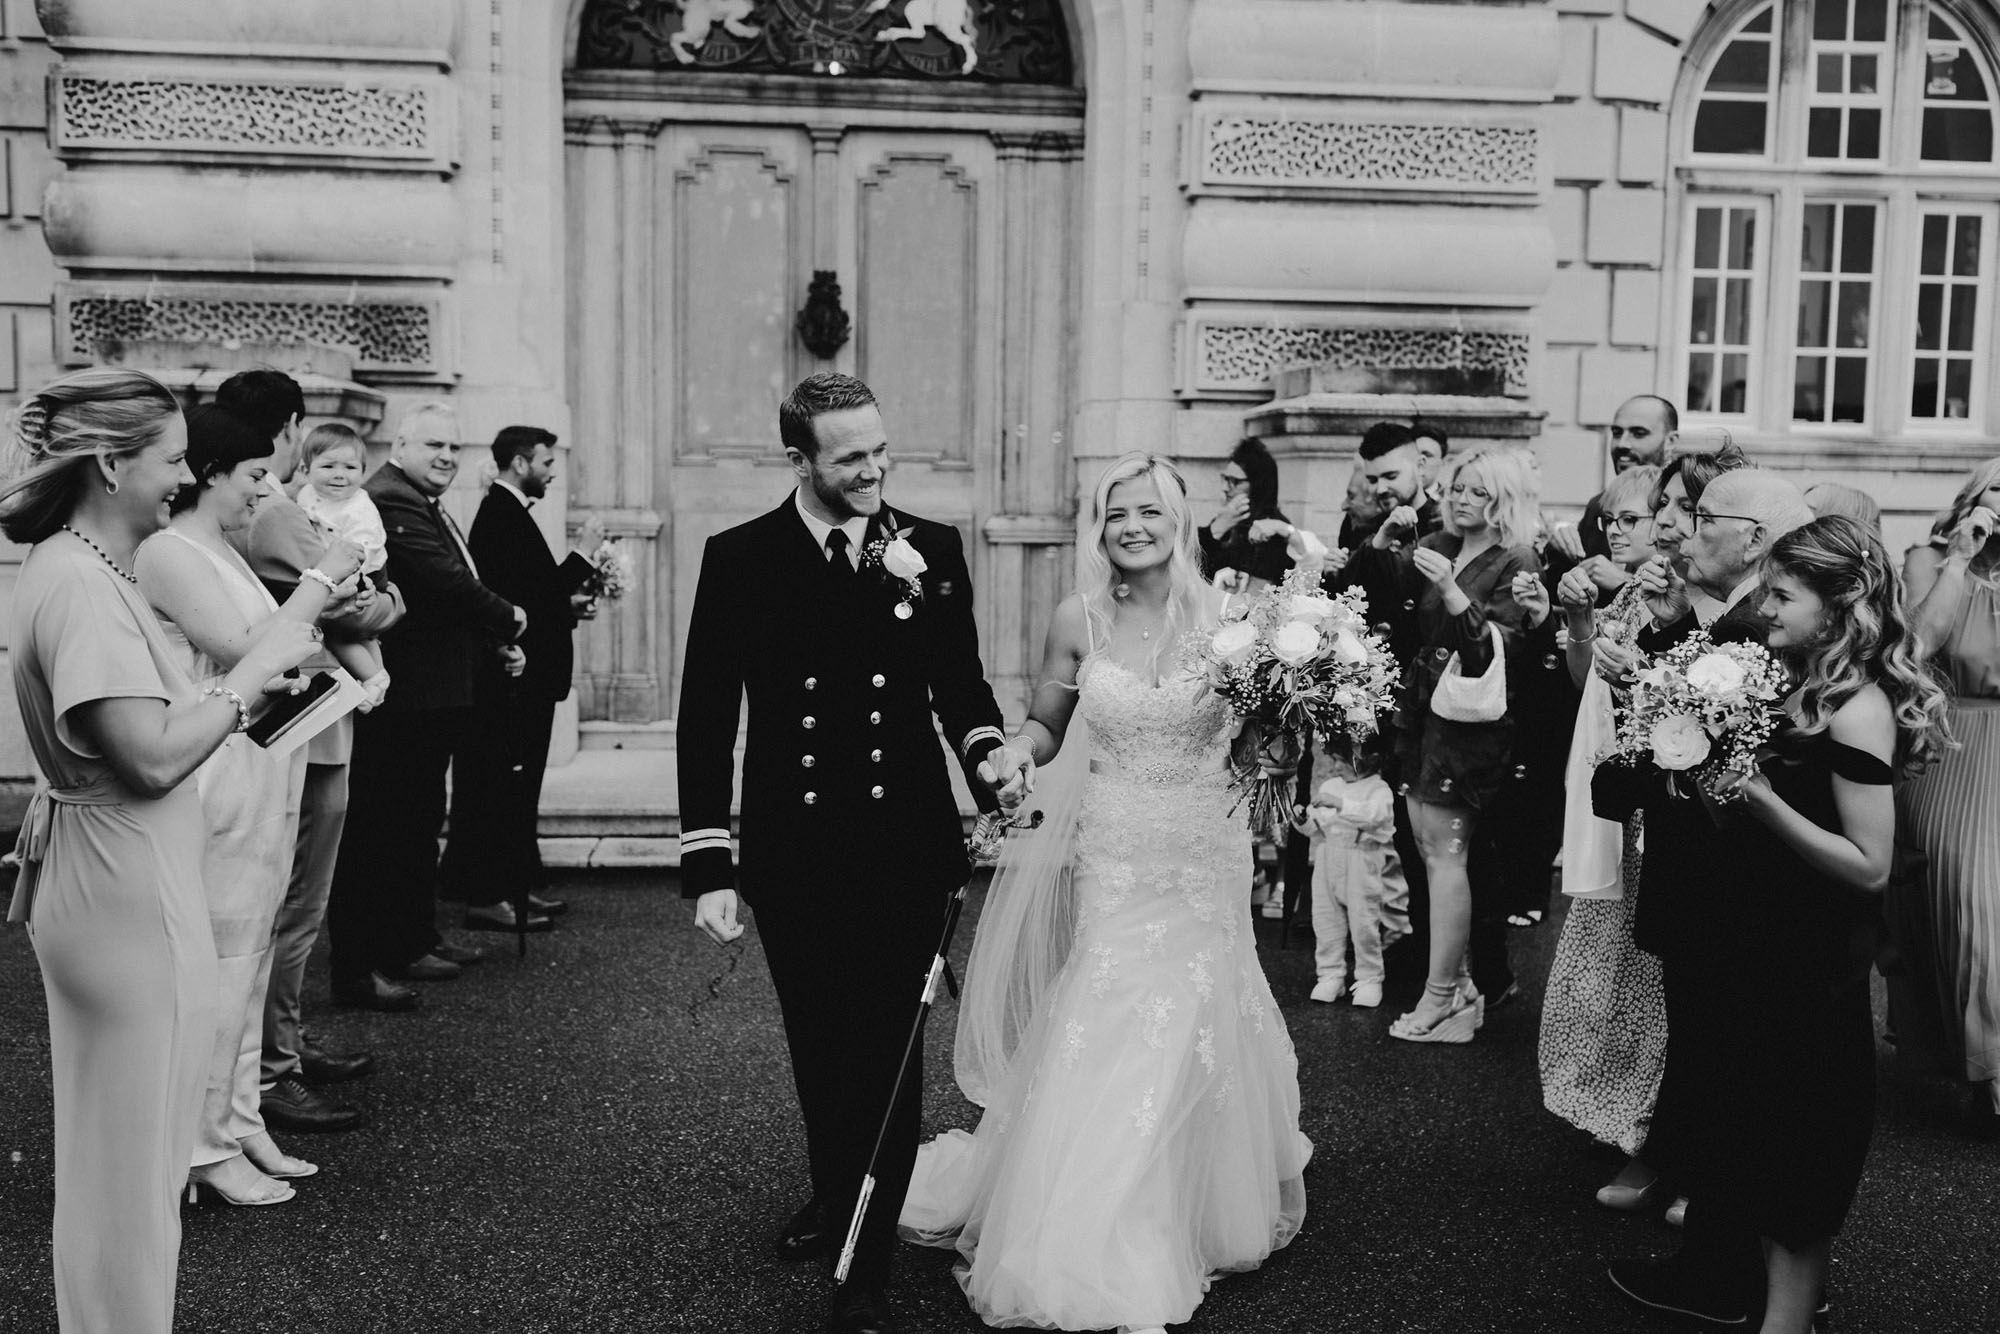 Elegant black and white wedding photograph of a groom and bride as guests blow bubbles instead of confetti. By Chris Armstrong Photography in Cornwall